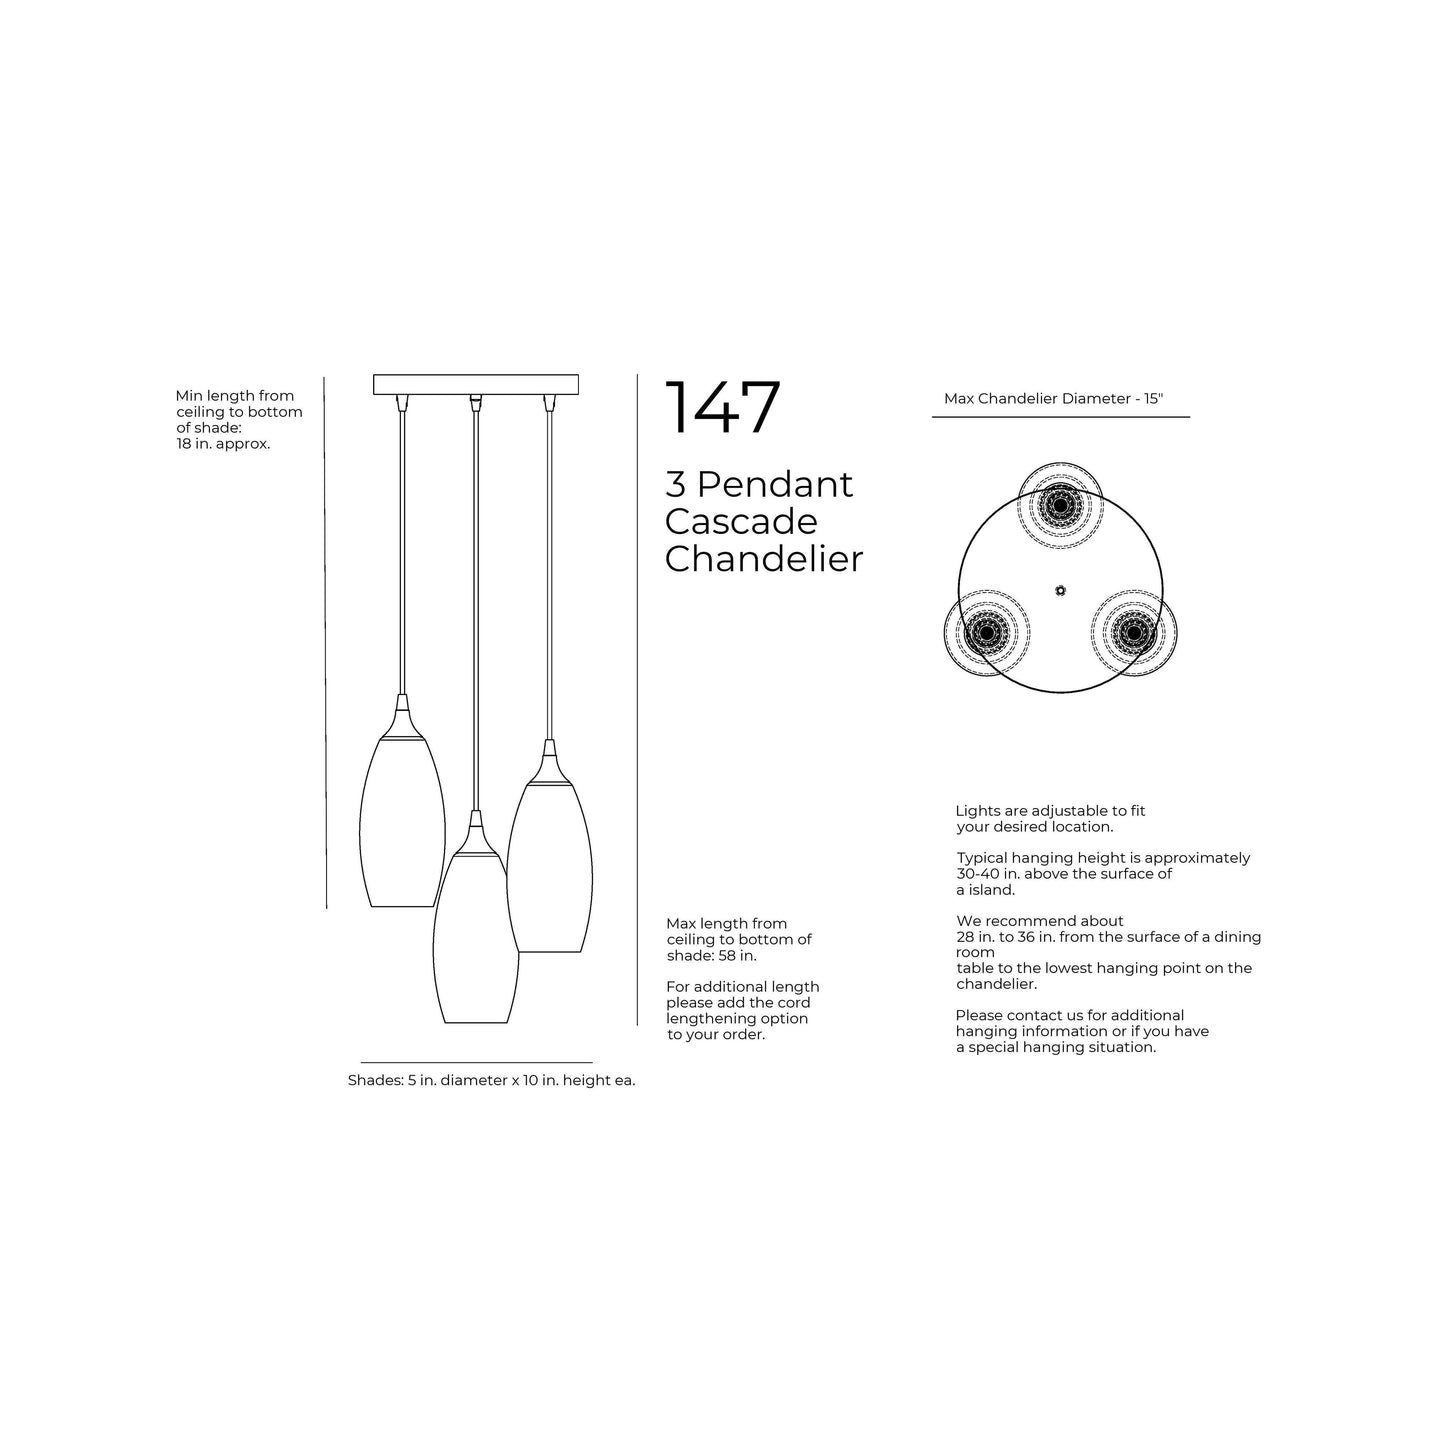 Maximum Hanging Height with standard 4 feet cords, 58 inches from ceiling to bottom of shade. 48 inches of cord per port. Minimum Hanging Height with standard 4ft cords, 3 inches minimum height for cord. 12 inch diameter canopy plate. Shade is 5 inches in diameter by 10.25 inches tall. Cord length comes standard at 4 feet of cord per port and can be cut to length during installation. 